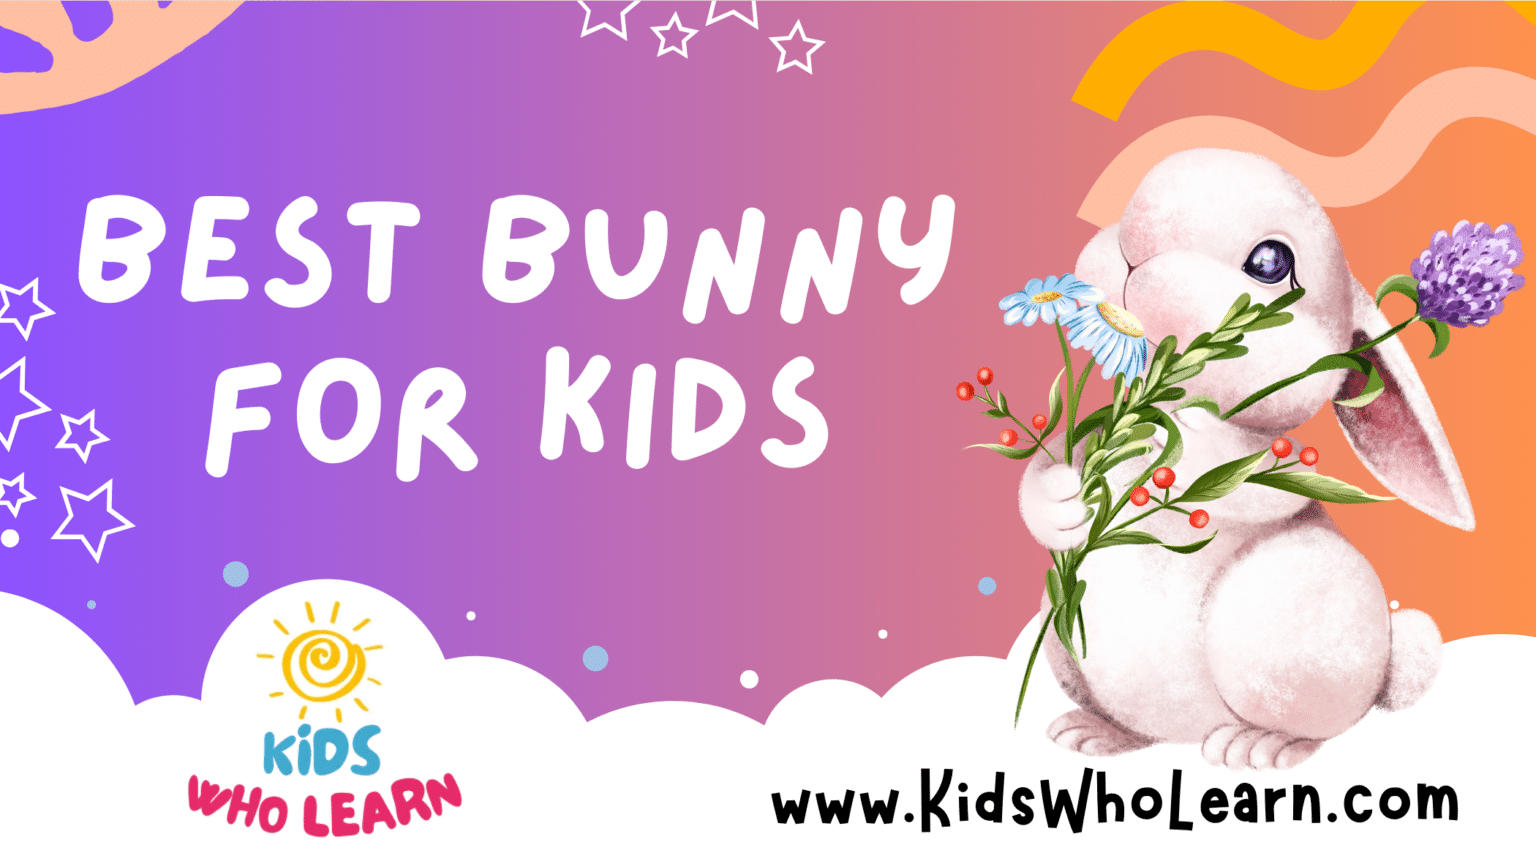 Best Bunny For Kids